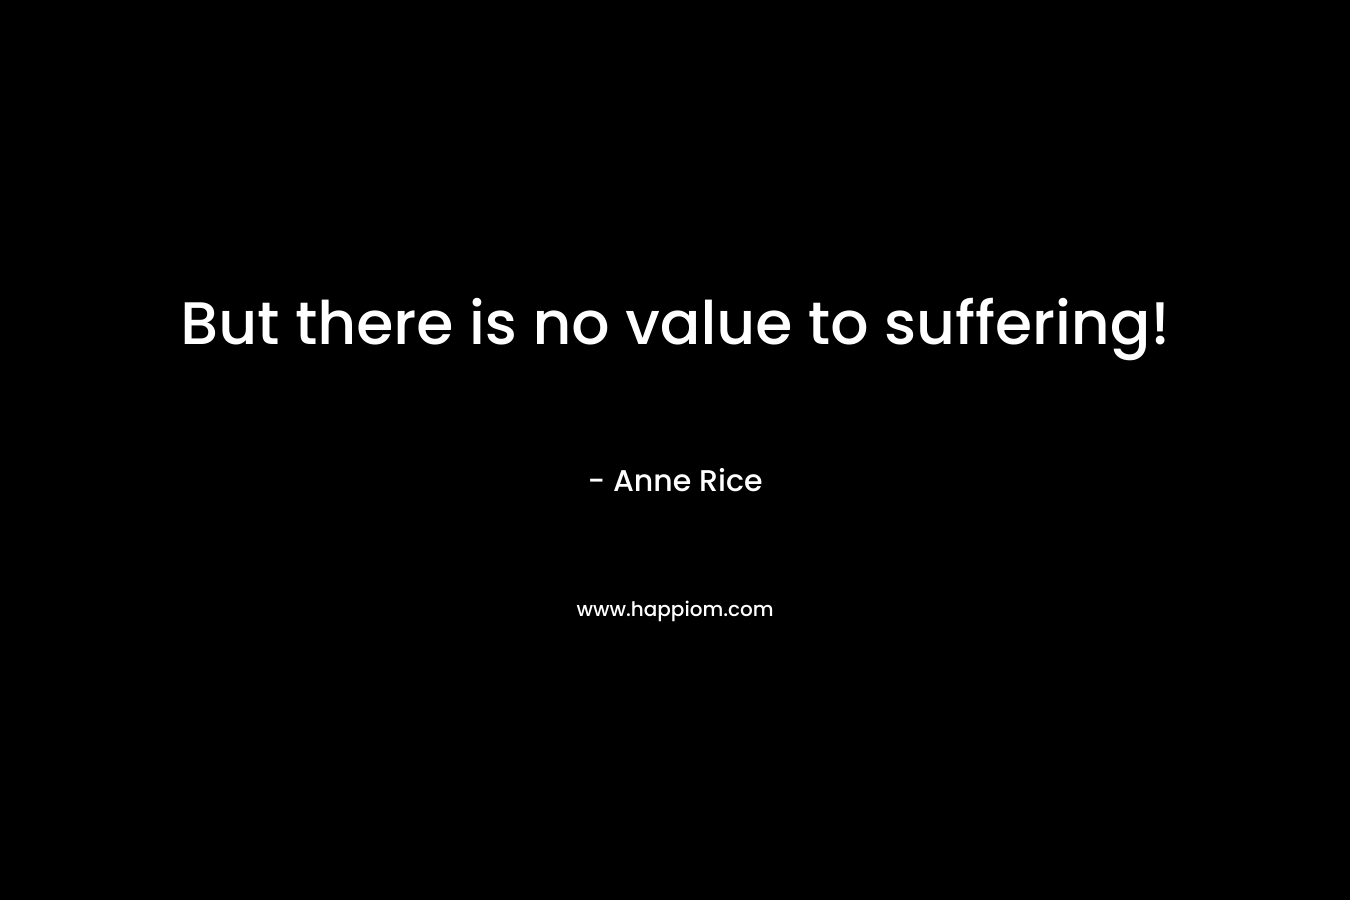 But there is no value to suffering!